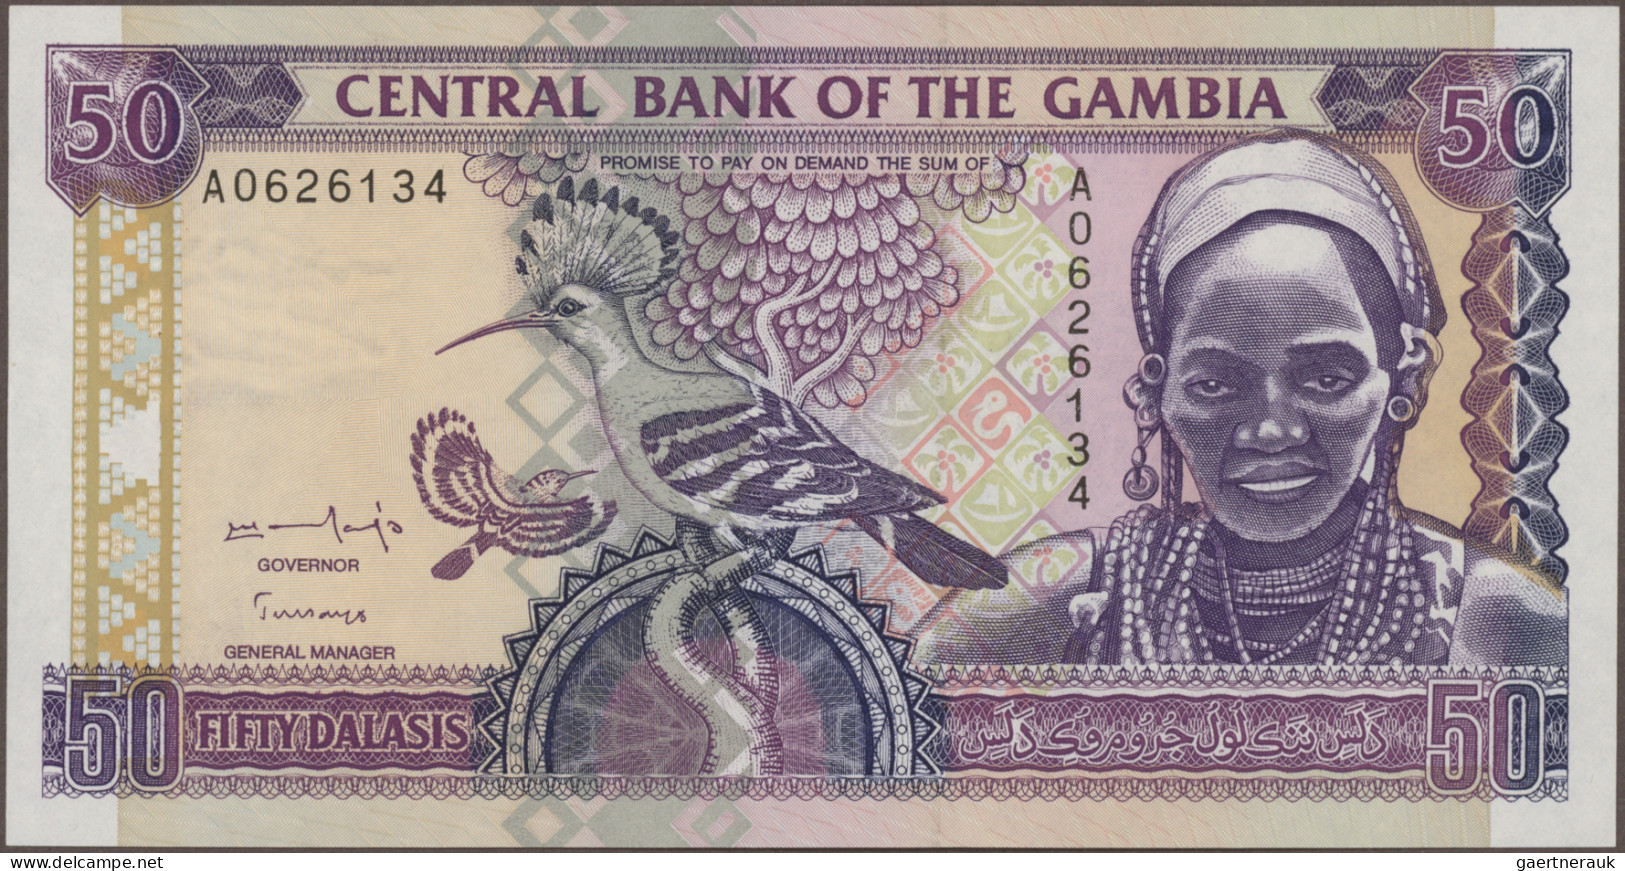 The Gambia: Central Bank of The Gambia, lot with 24 banknotes, series 1995-2015,